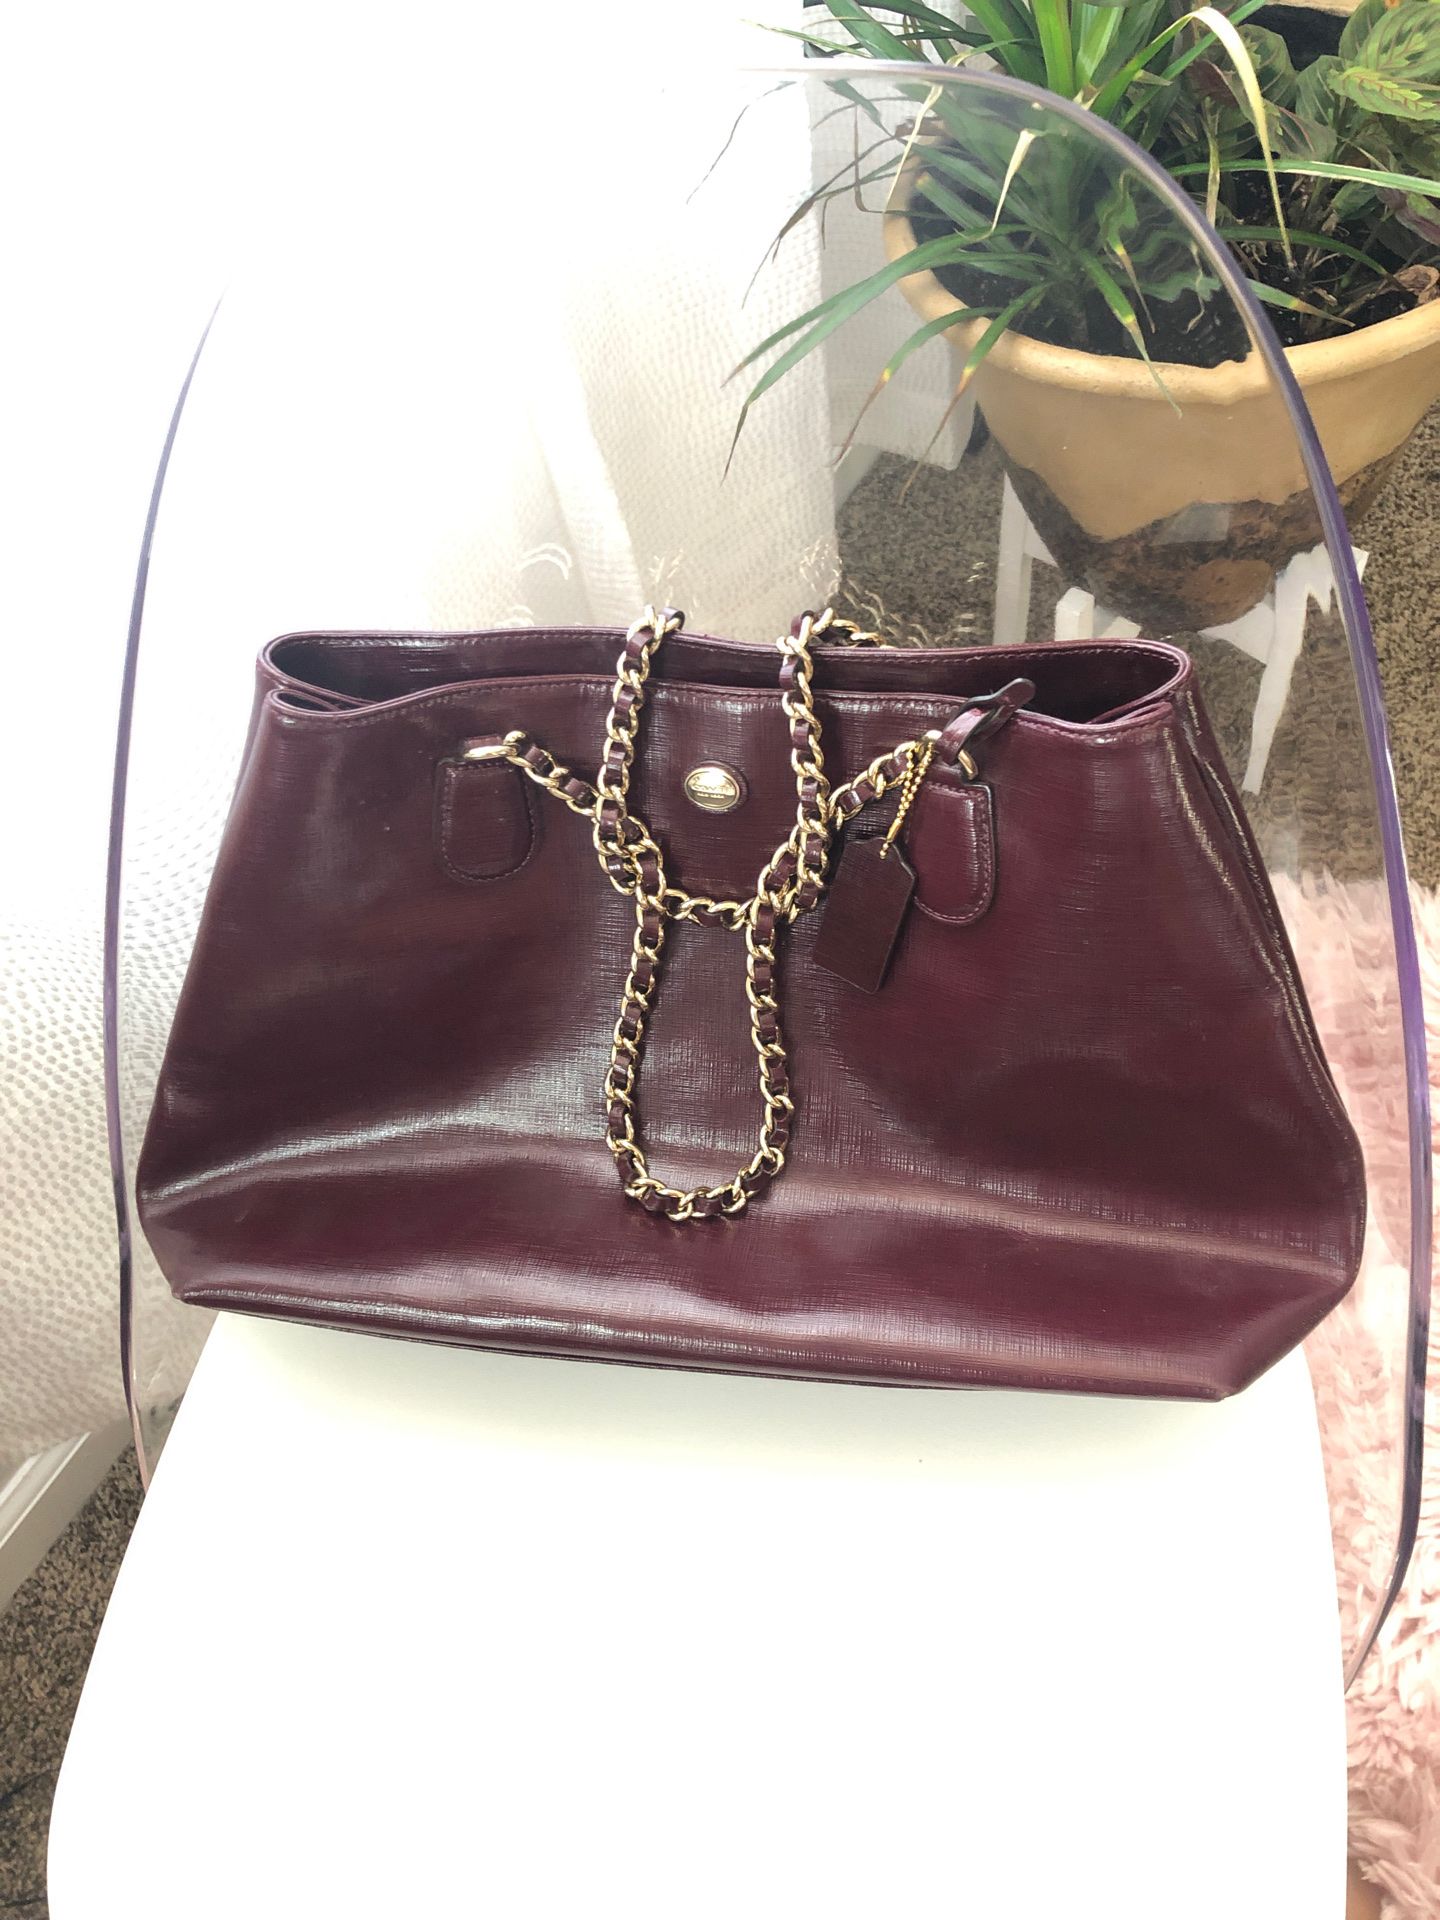 Shiny plum leather coach purse with gold chain.